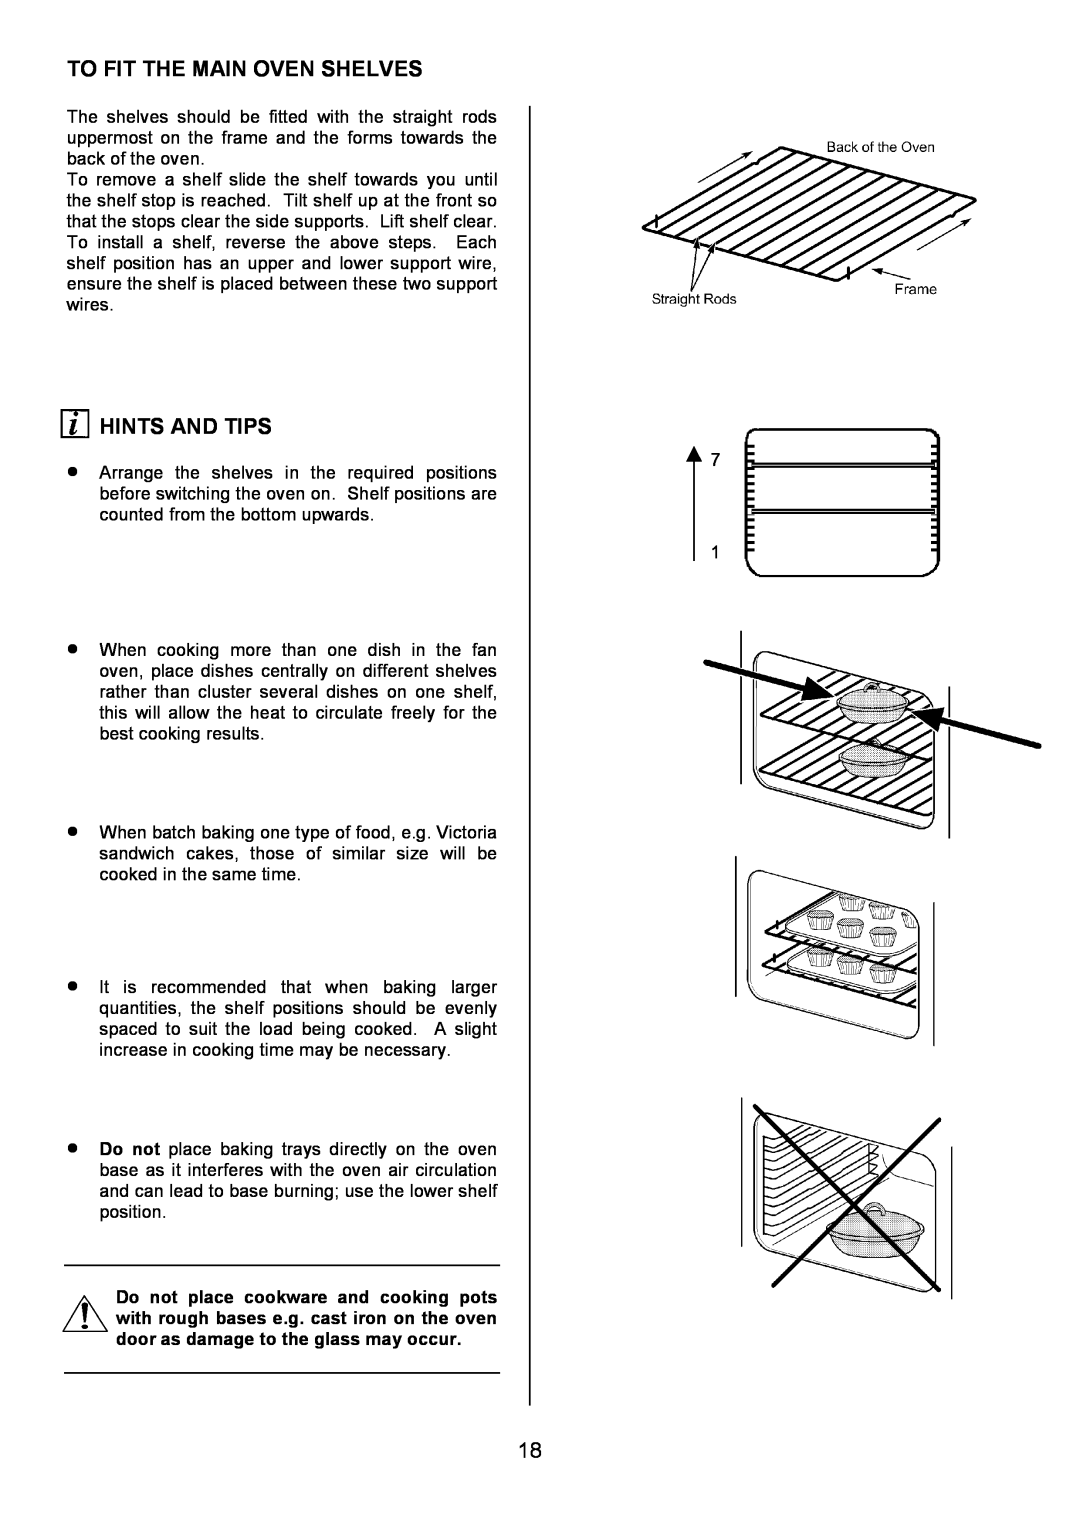 Zanussi ZOU 330 manual To Fit The Main Oven Shelves, Hints And Tips 